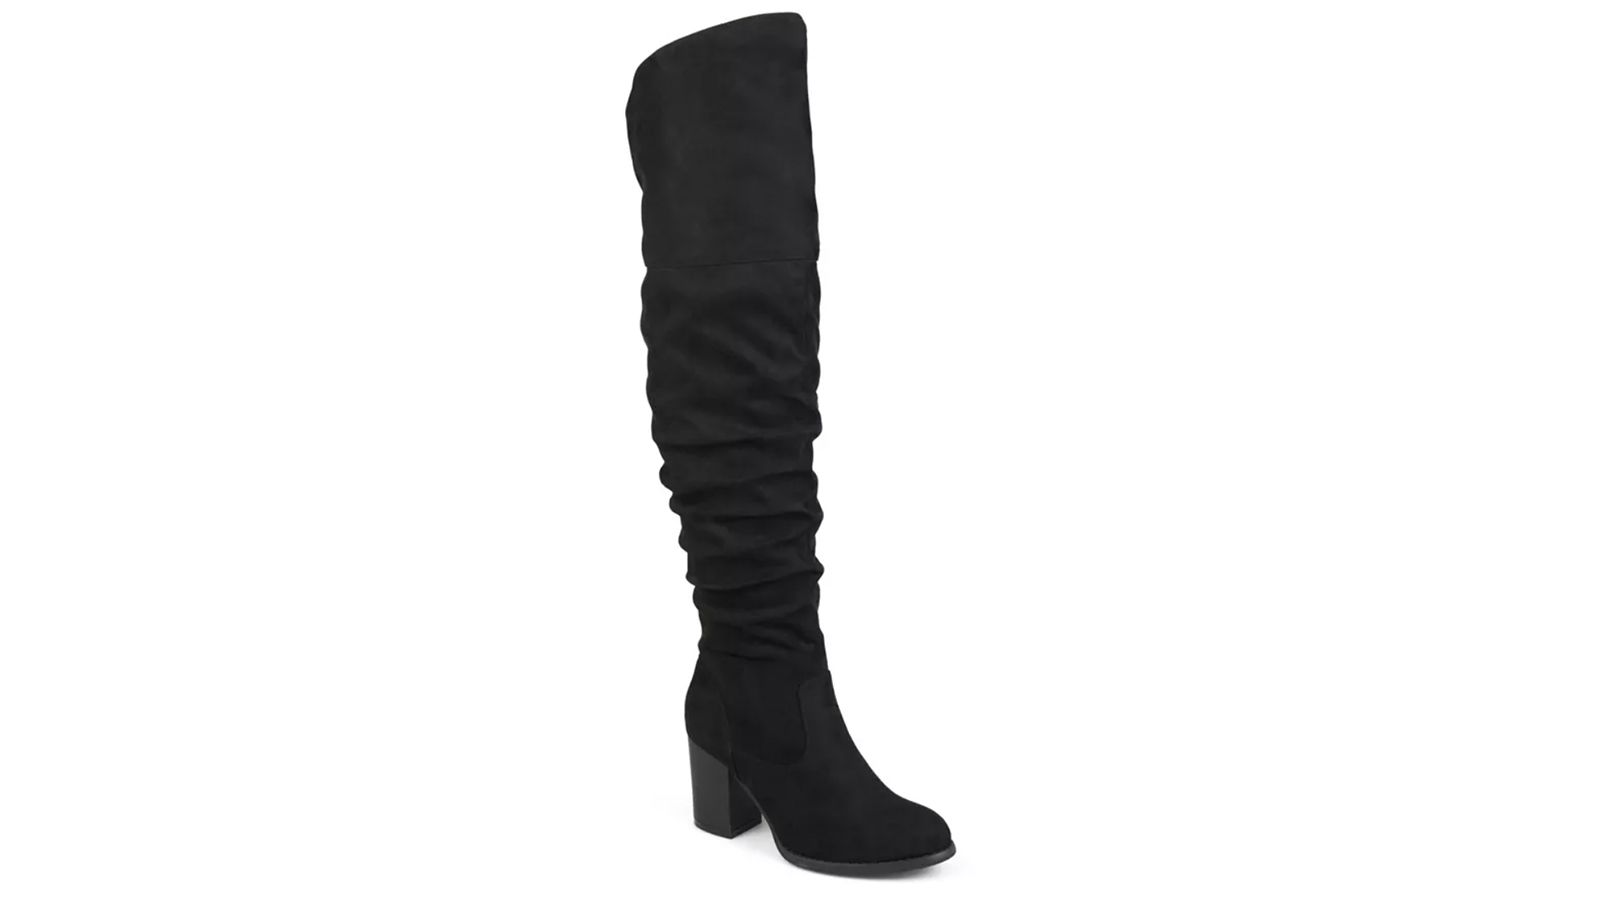 Women Knee High Boots Mid Calf Stiletto Heel Zip Boots Suede Stretch Boots Shoes